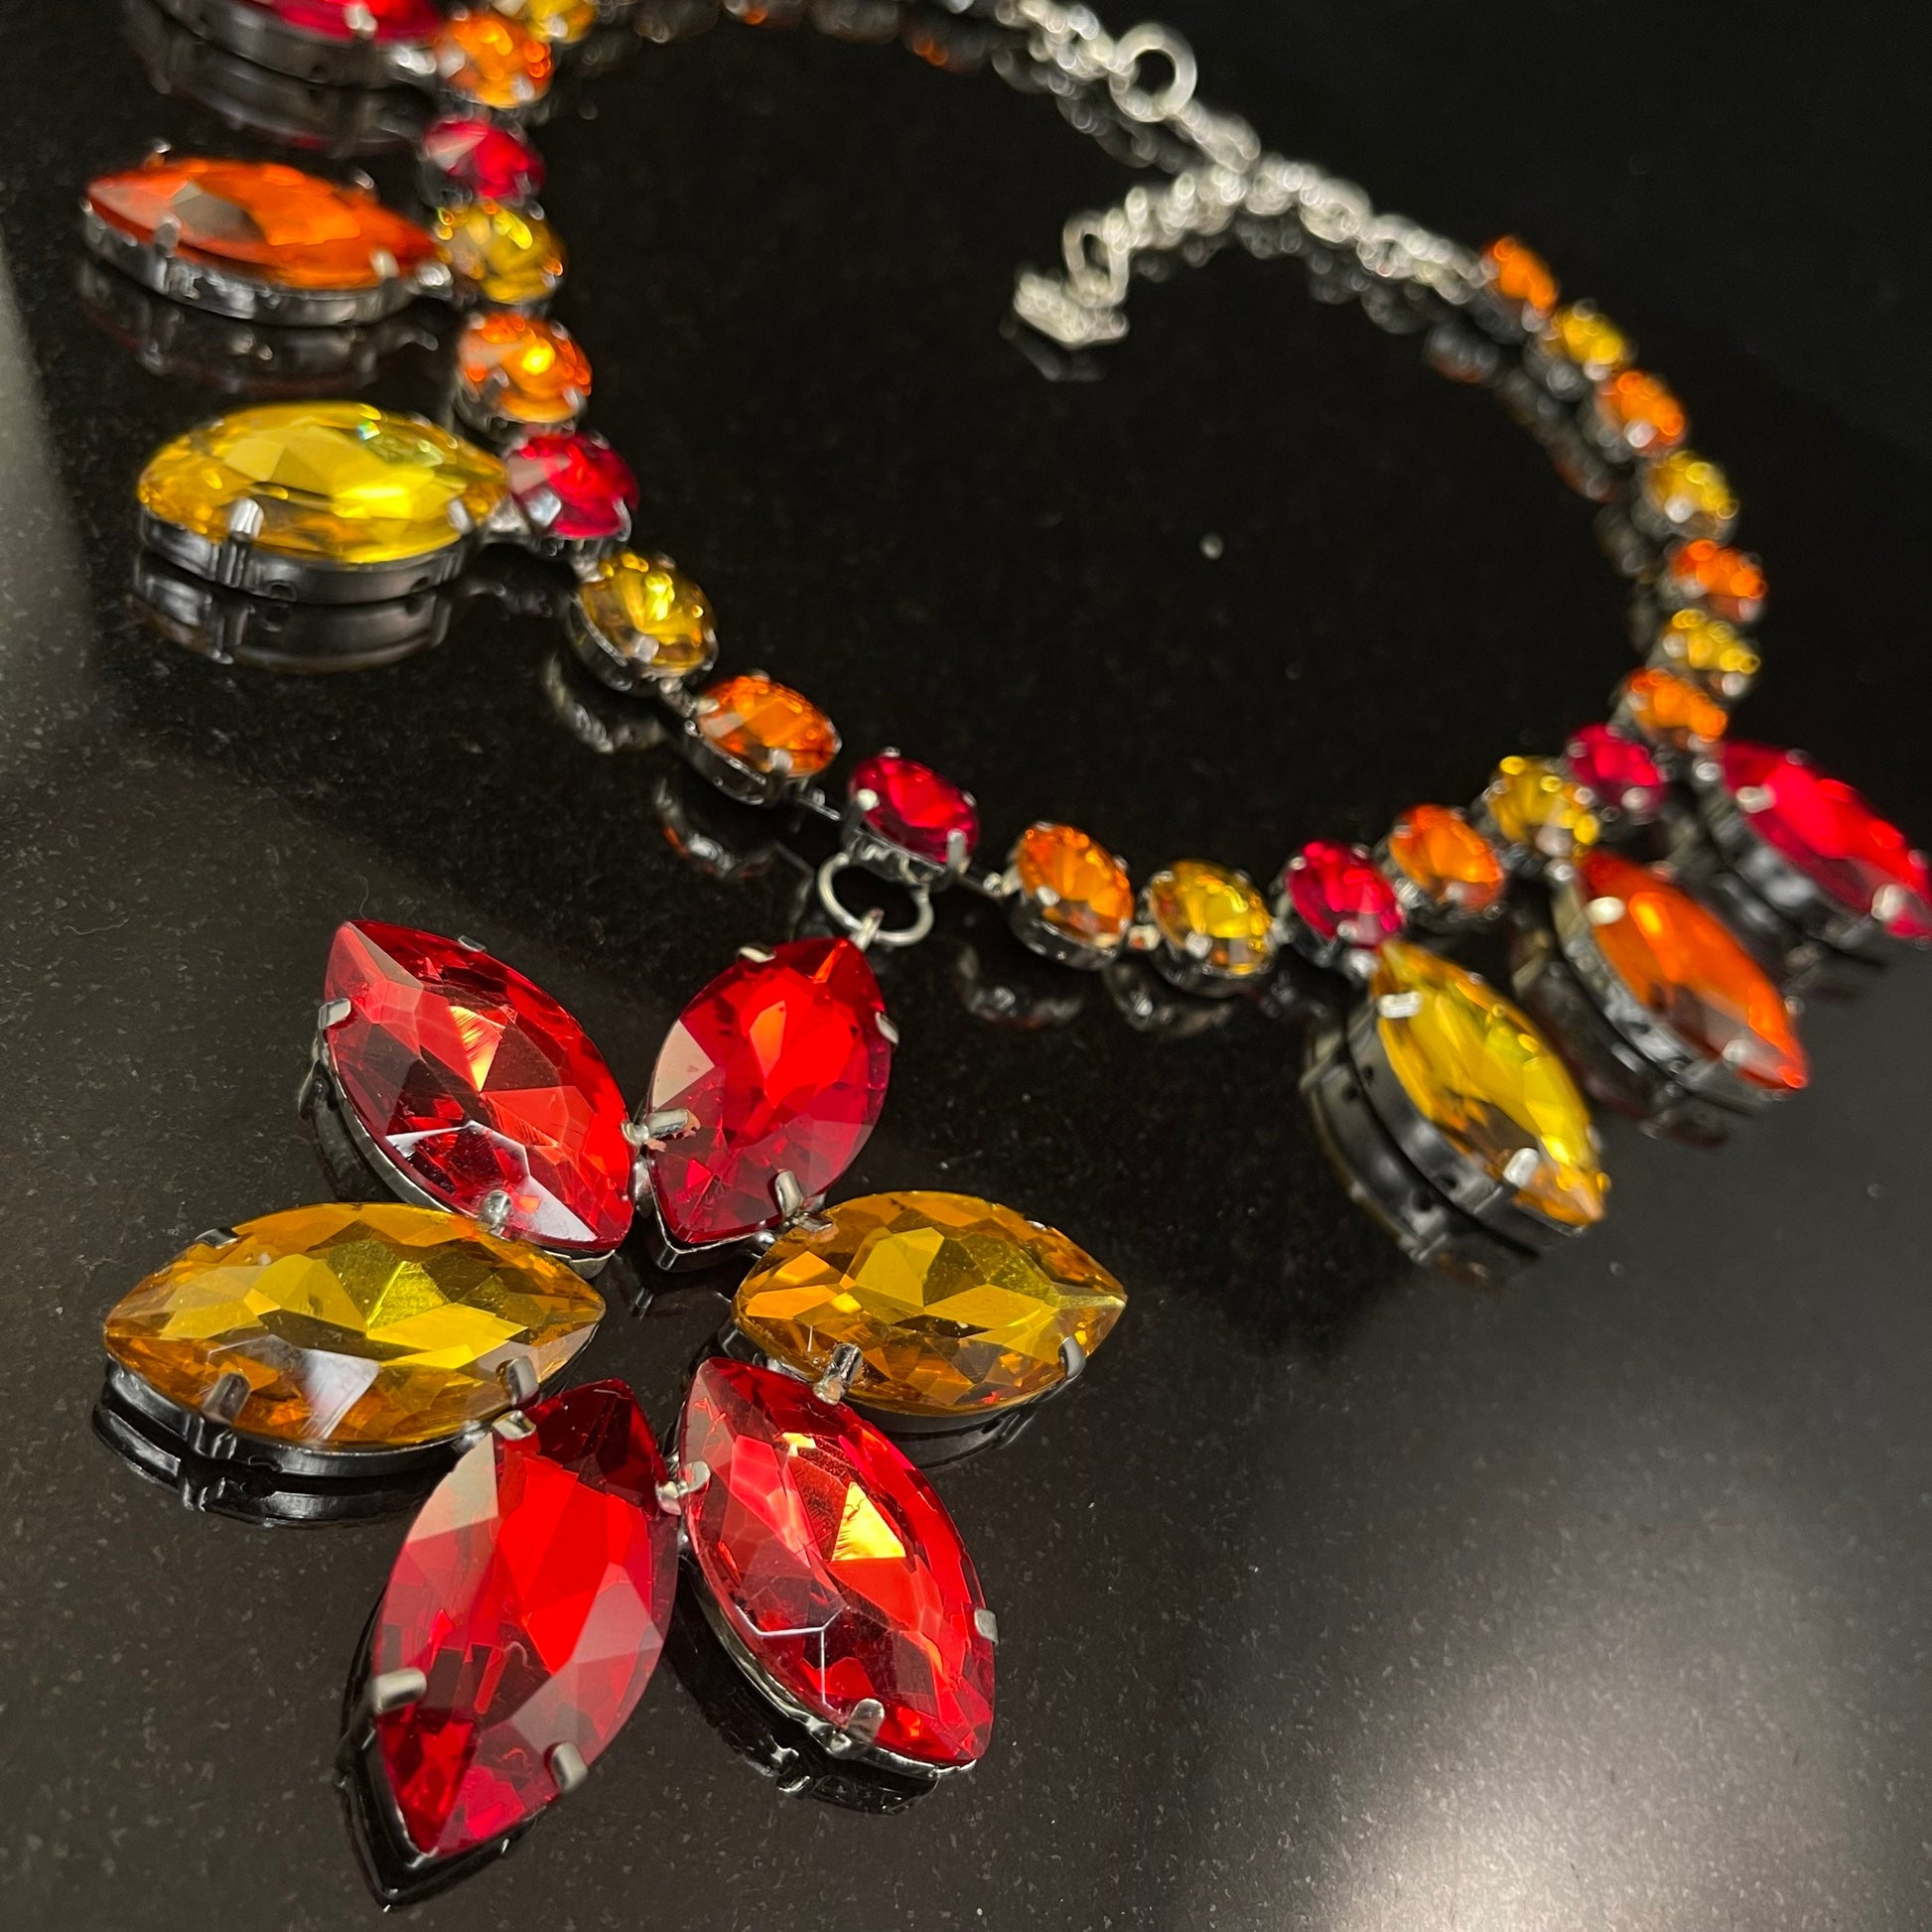 Amber Necklace  / Pendent Necklace / Adjustable / Drag Queen Costume Jewelry / Cocktails Jewellery